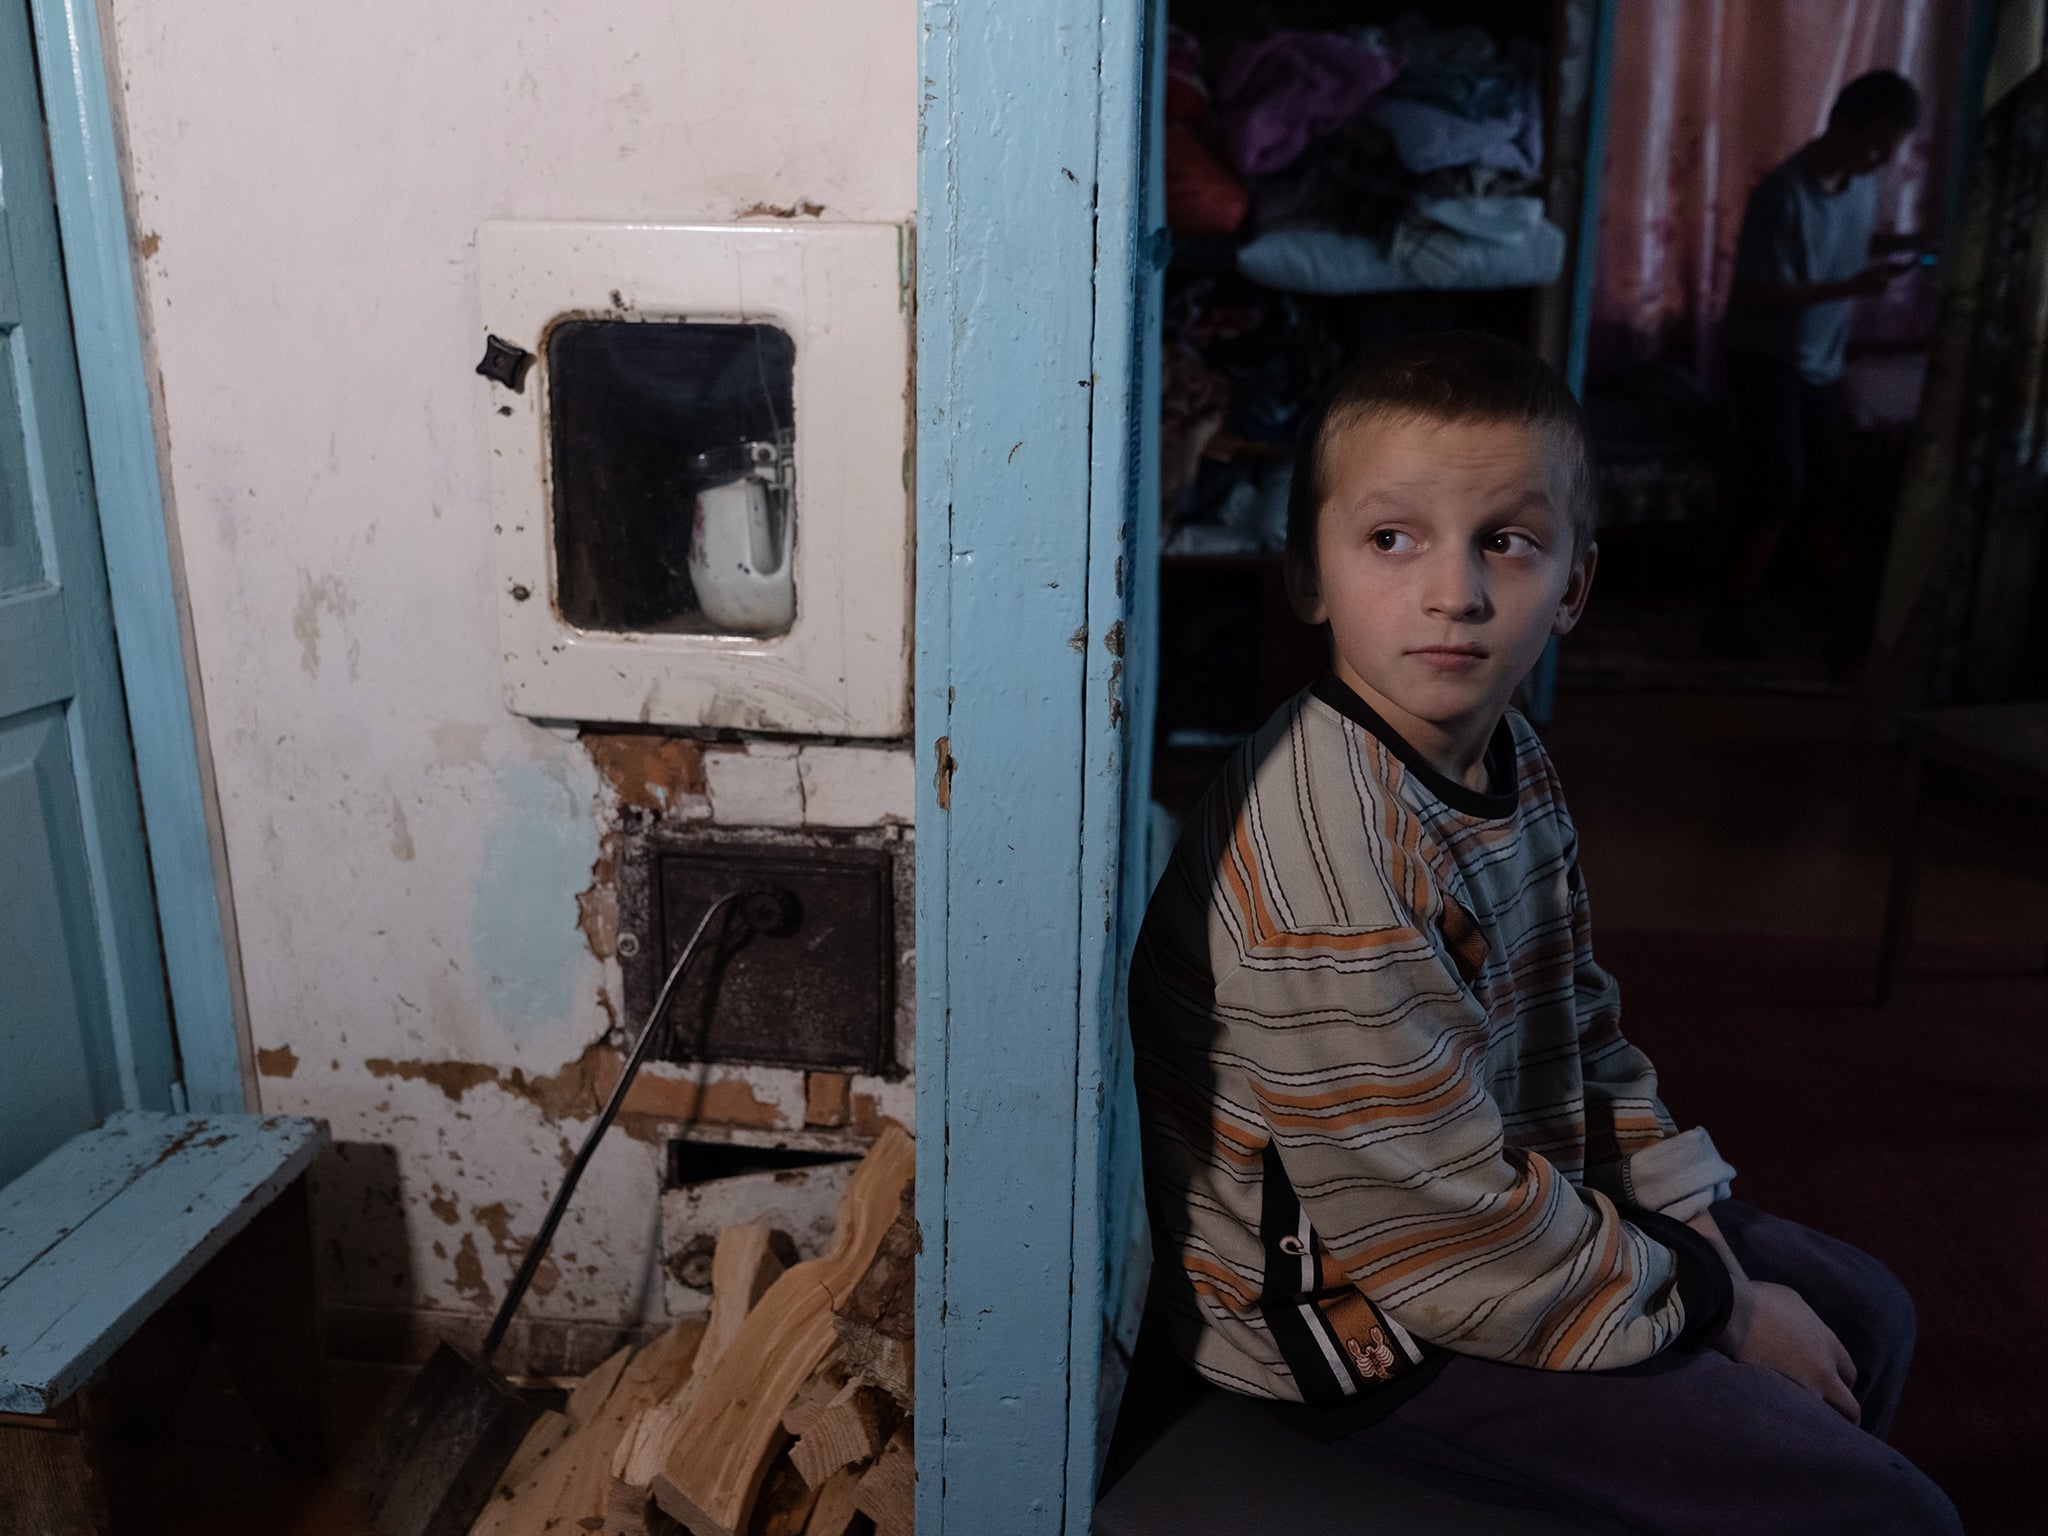 Dmytro* lives with his mother and six younger siblings in northern Ukraine, near the border with Russia and Belarus